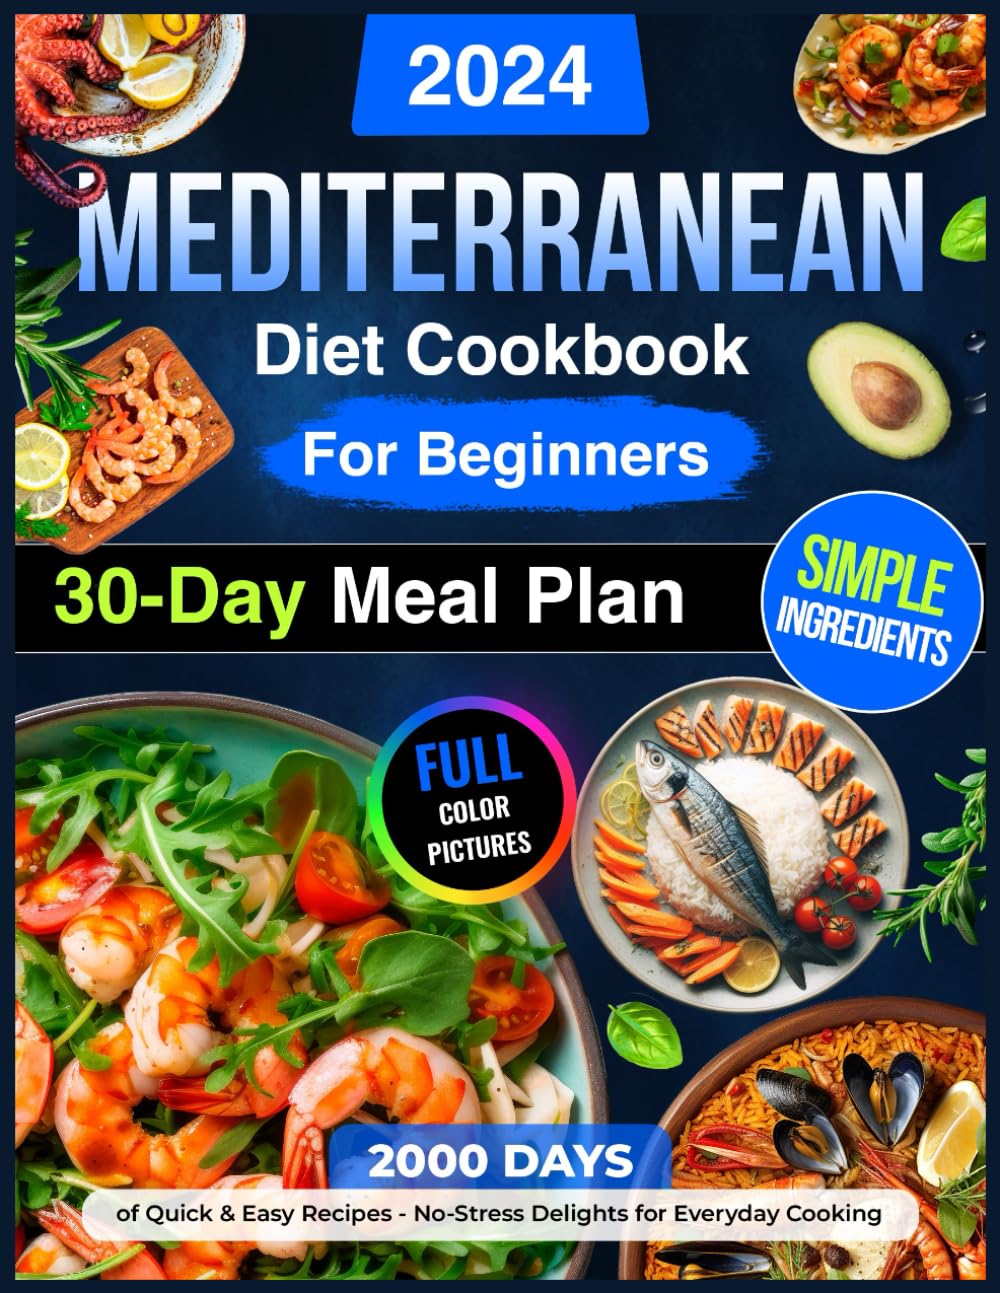 Mediterranean Diet Cookbook for Beginners: 2000 Days of Quick & Easy Recipes – No-Stress Delights with a 30-Day Meal Plan & Simple Ingredients for ... Pictures of Healthy Mediterranean Recipes)